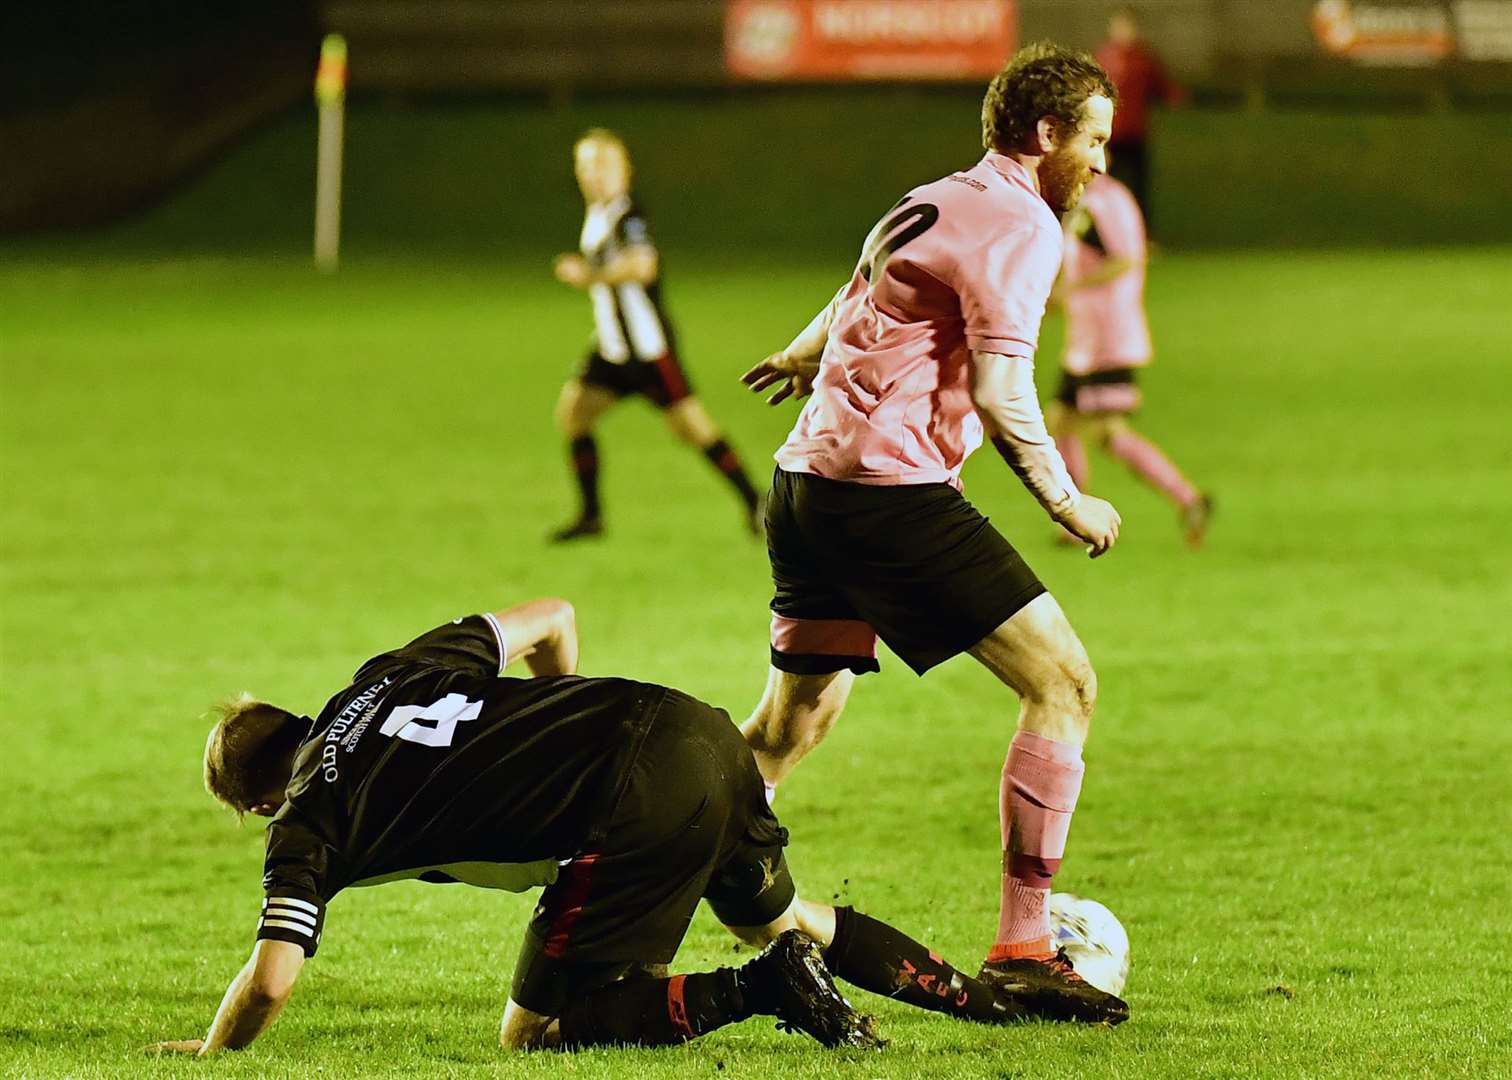 A sore one for Academy captain Alan Farquhar as Clach's Scott Graham appears to stand on his ankle. Picture: Mel Roger